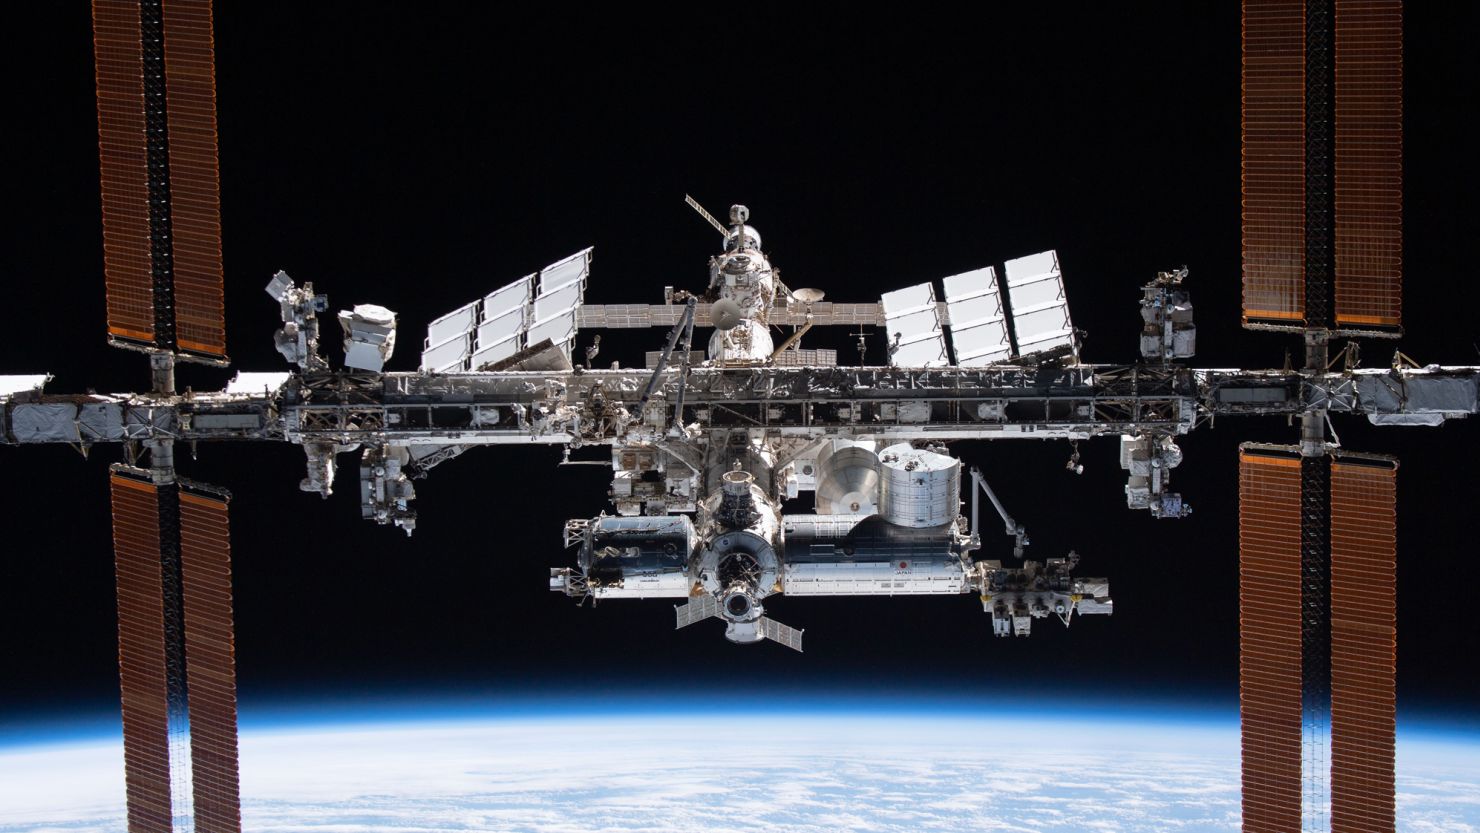 It's prime time for spotting the space station